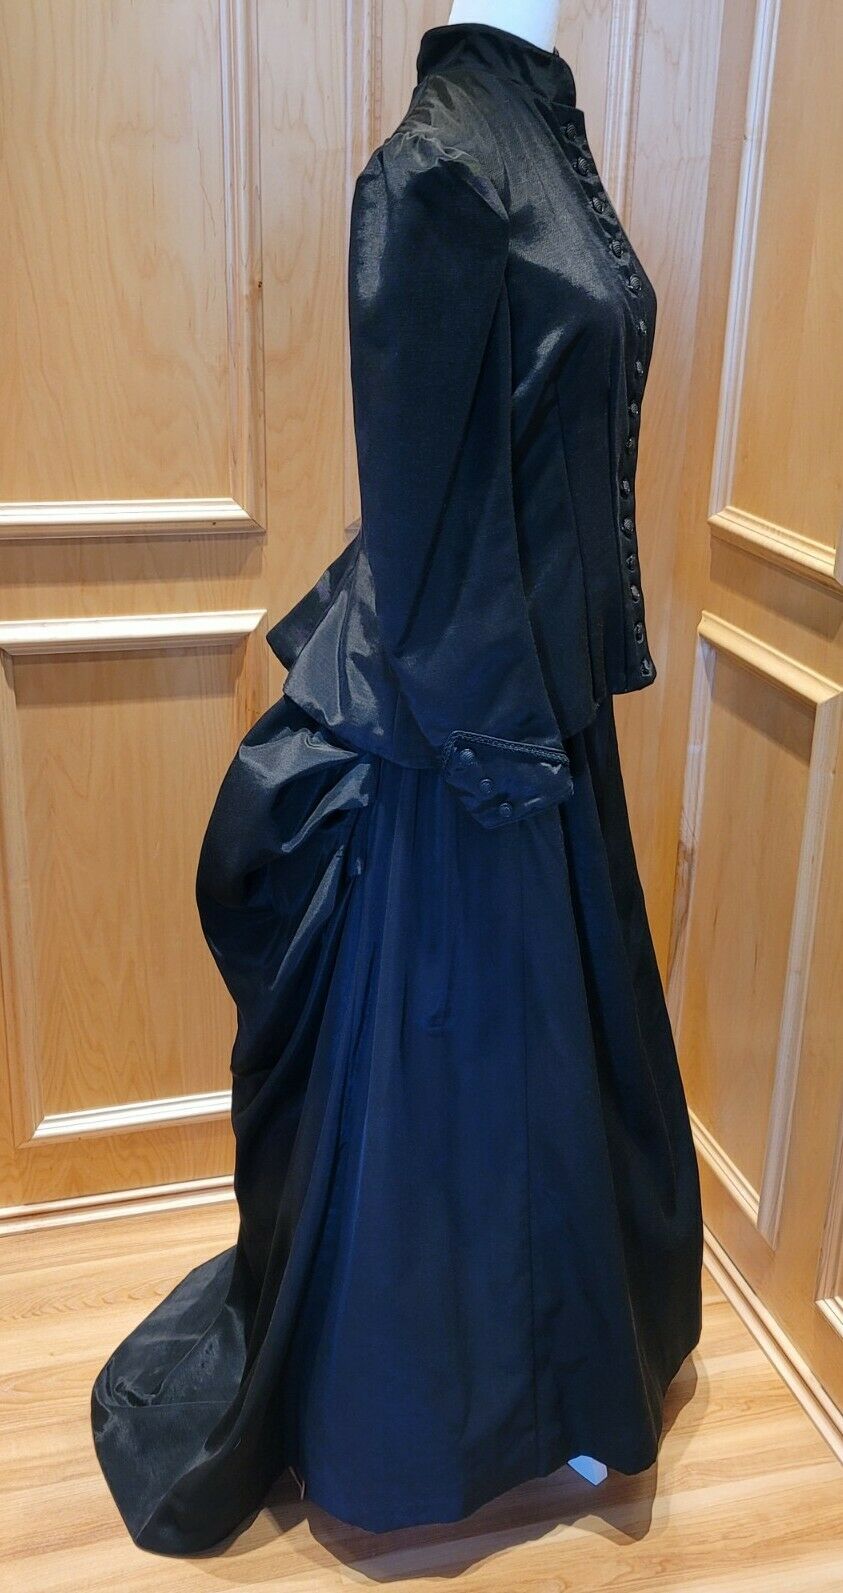 Victorian Edwardian Black 2 Piece Historical Reproduction Mourning Dress